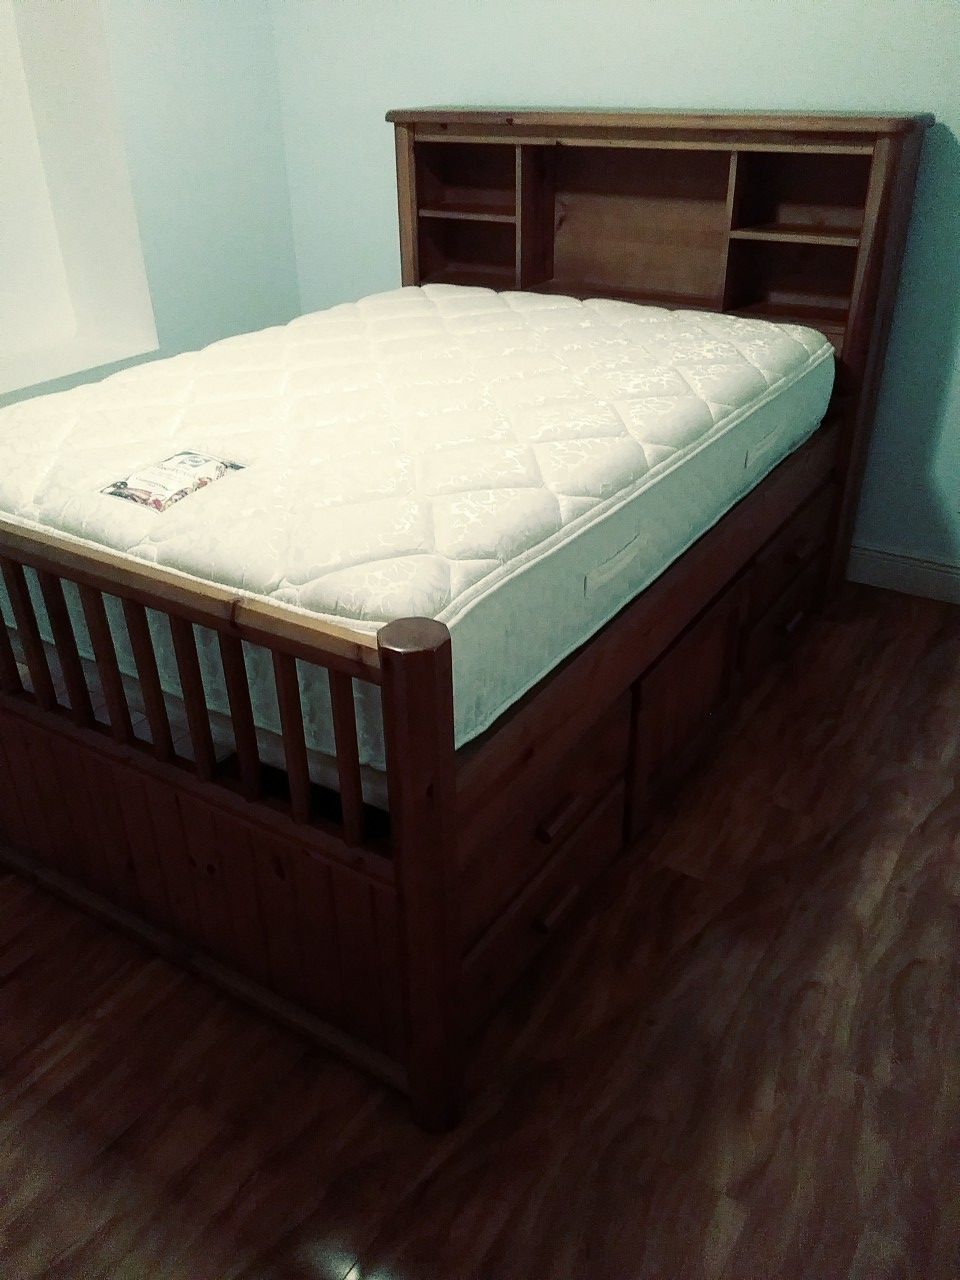 Full size bed with shelves and drawers and storage